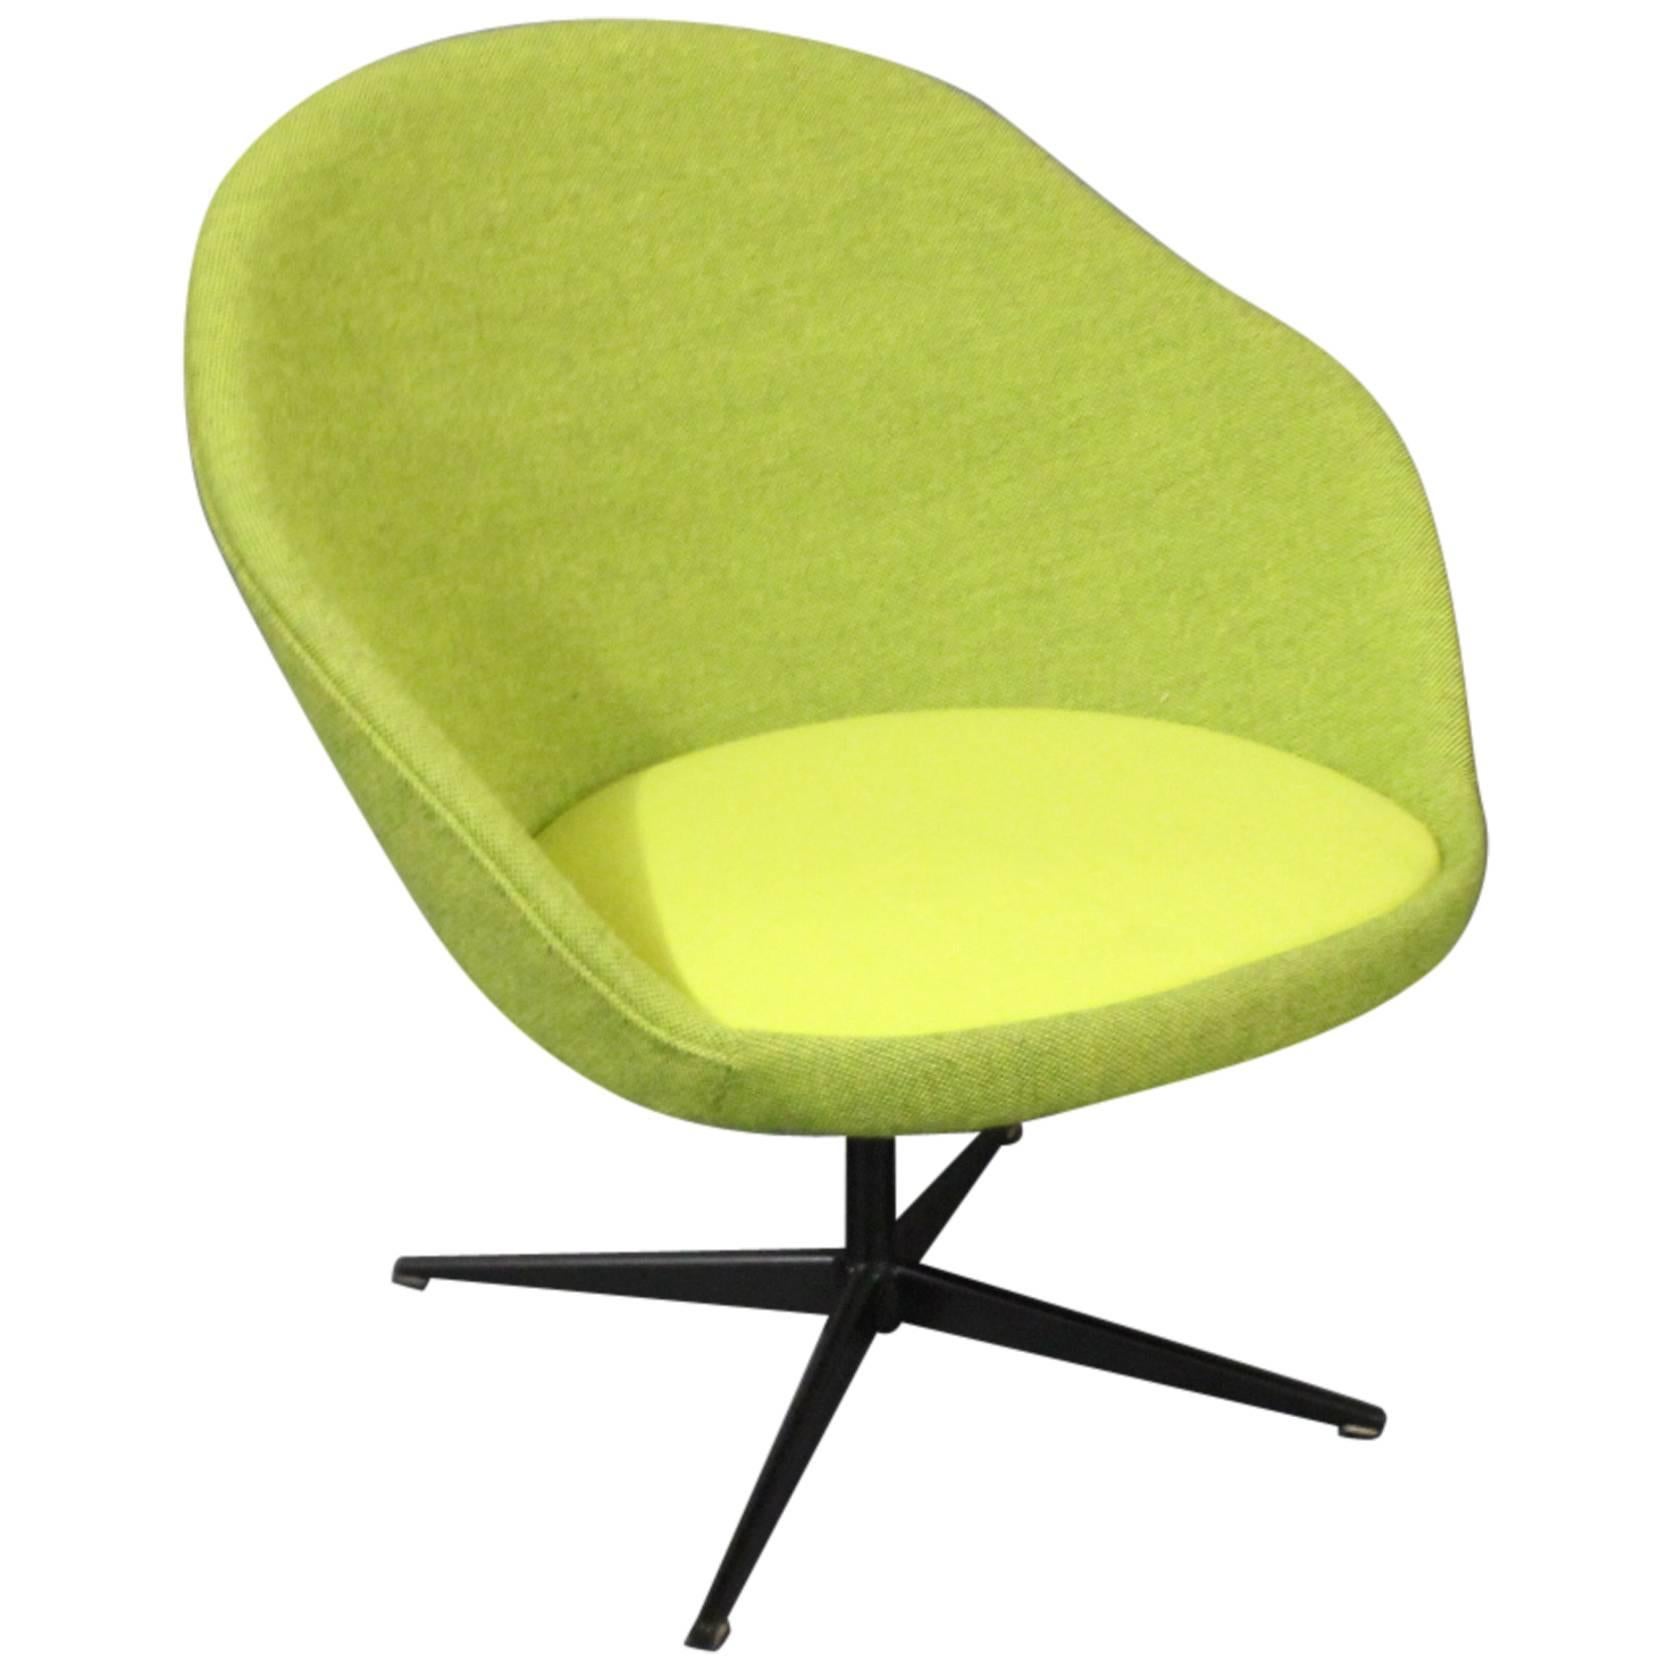 Lounge Chair in Green Hallingdal Wool, Danish Design from the 1960s